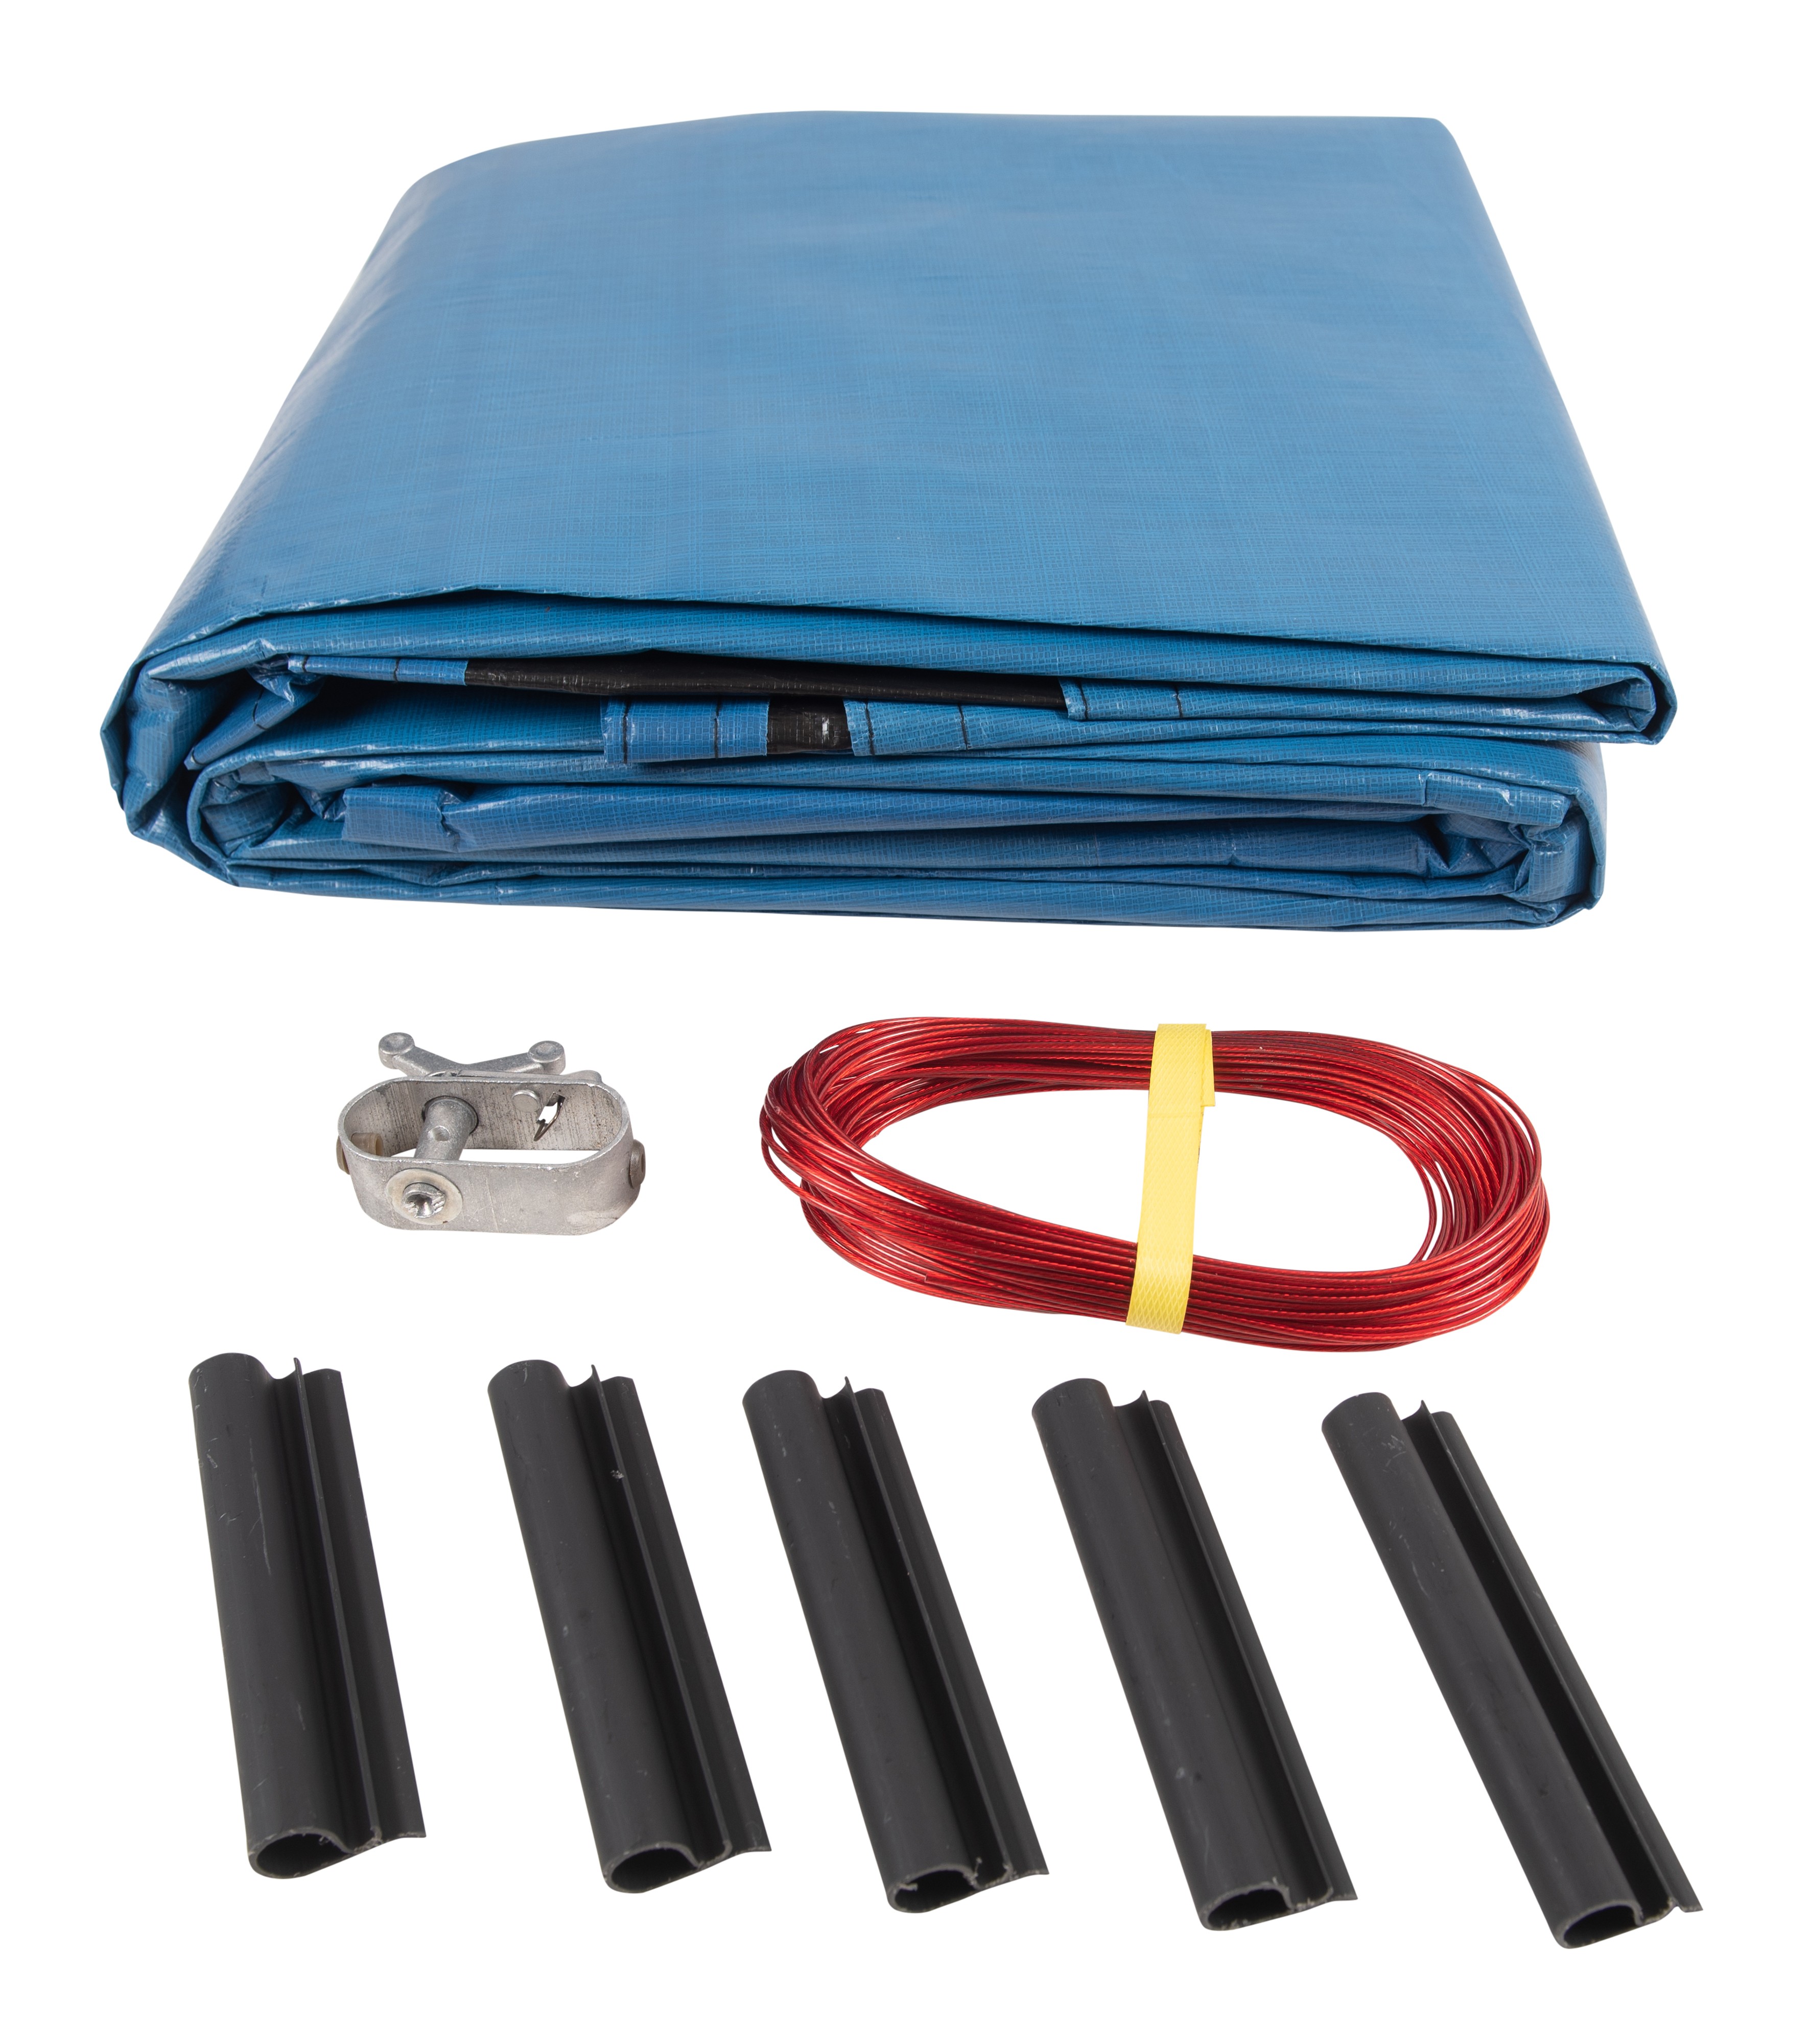 SET SunSolar Energy Technologies-  Super Duty series Above Ground Solid Pool Cover for 18x38 Foot Oval Swimming Pool - Winter Pool Cover with Sturdy Cable and Winch 15-Yr warranty. Cover Clips Included.